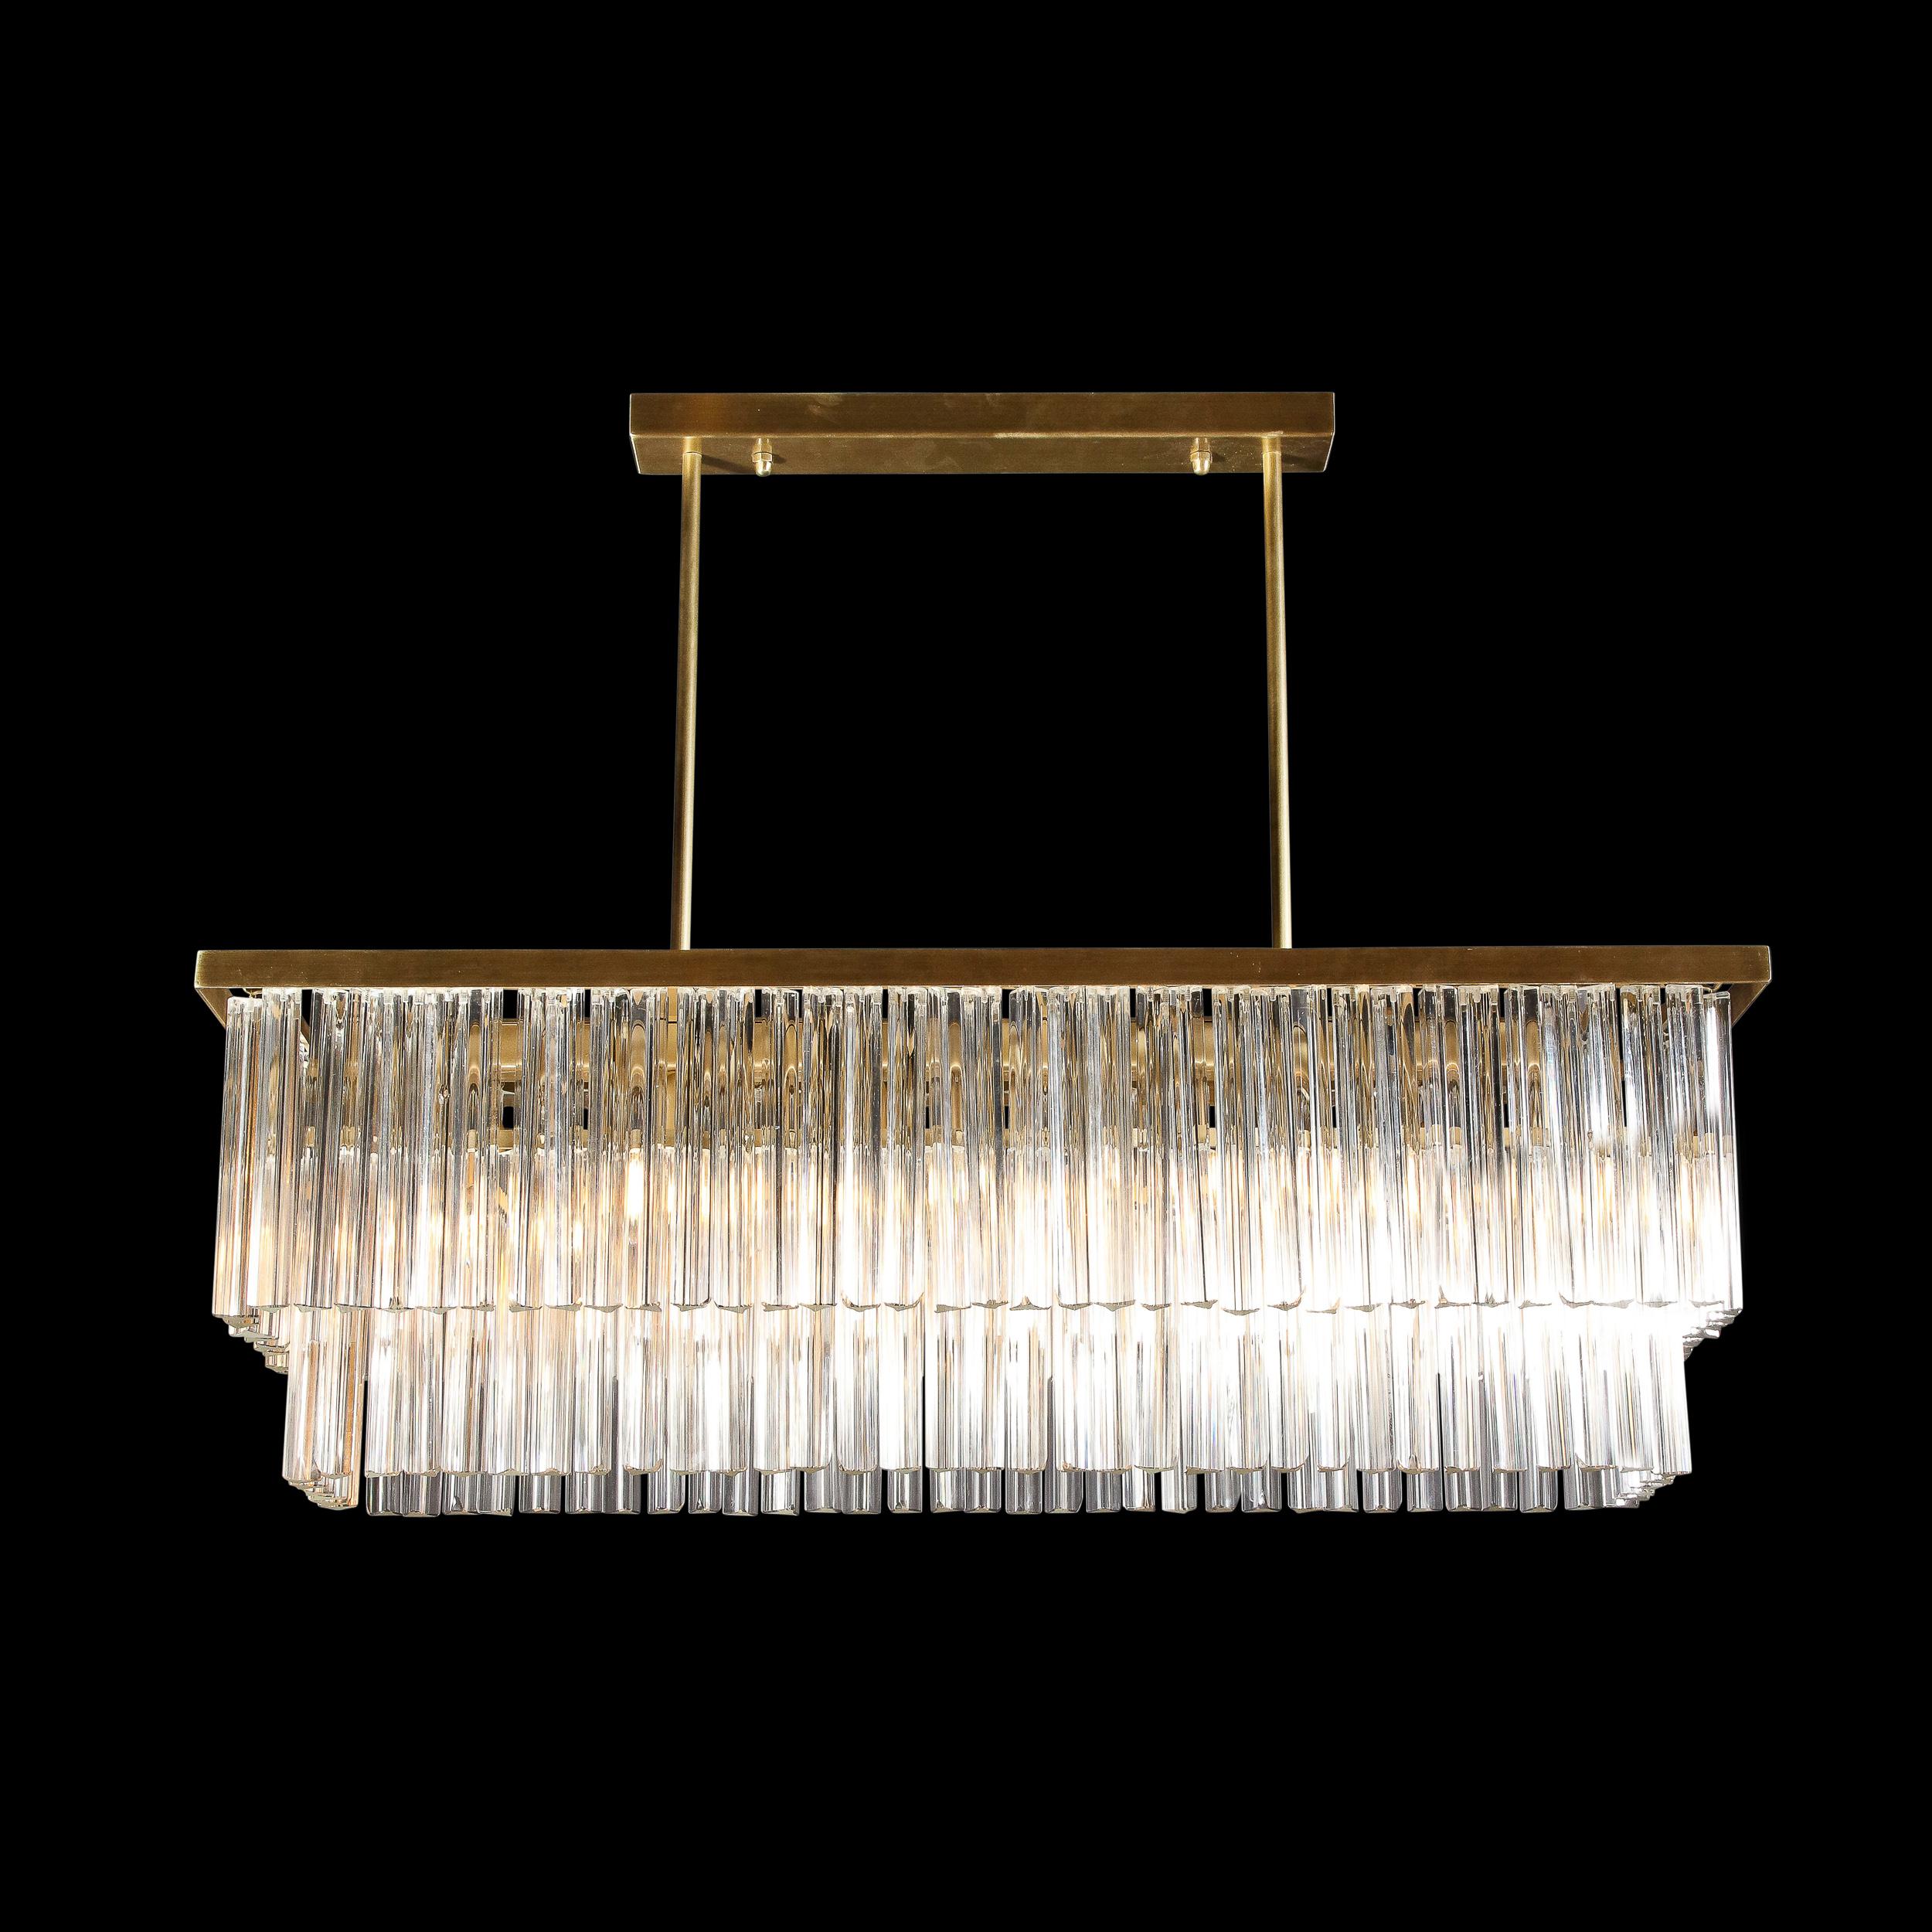 This stunning and dramatic modernist triedre chandelier was realized in Murano, Italy- the island off the coast of Venice renowned for centuries for its superlative glass production. It features two tiers of Murano triedre crystals- one of the most